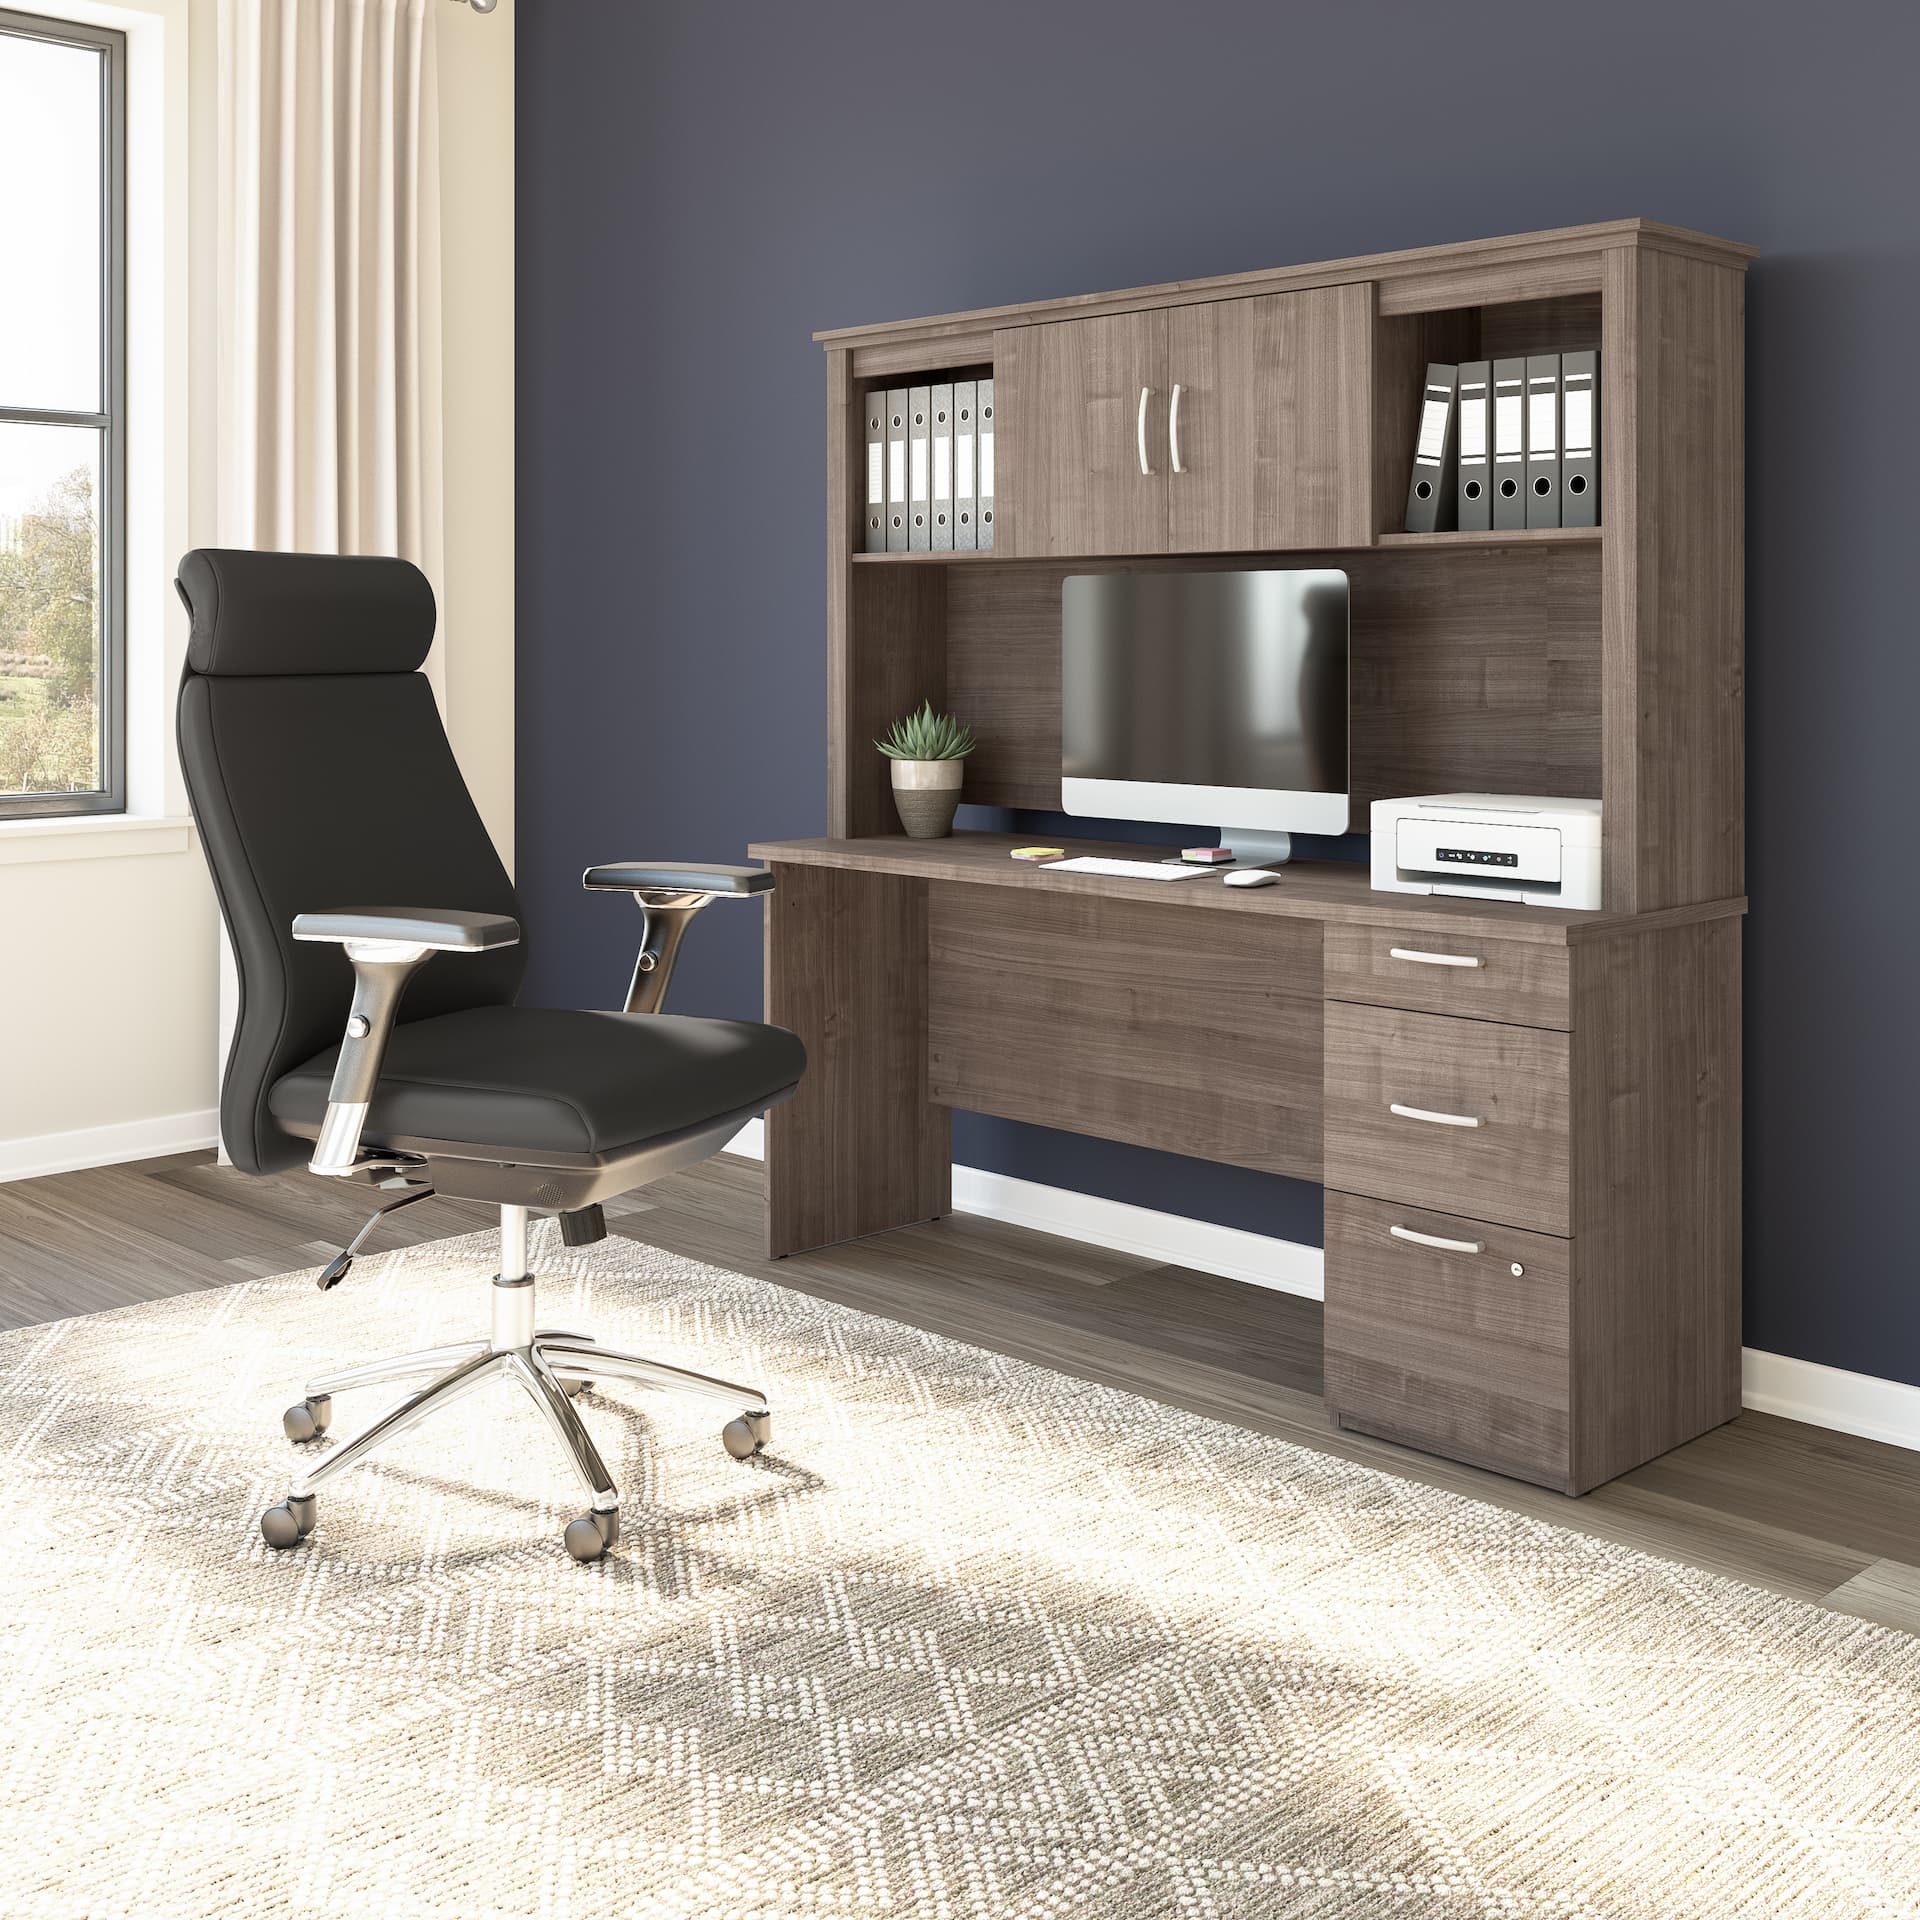 Storage furniture for any workspace